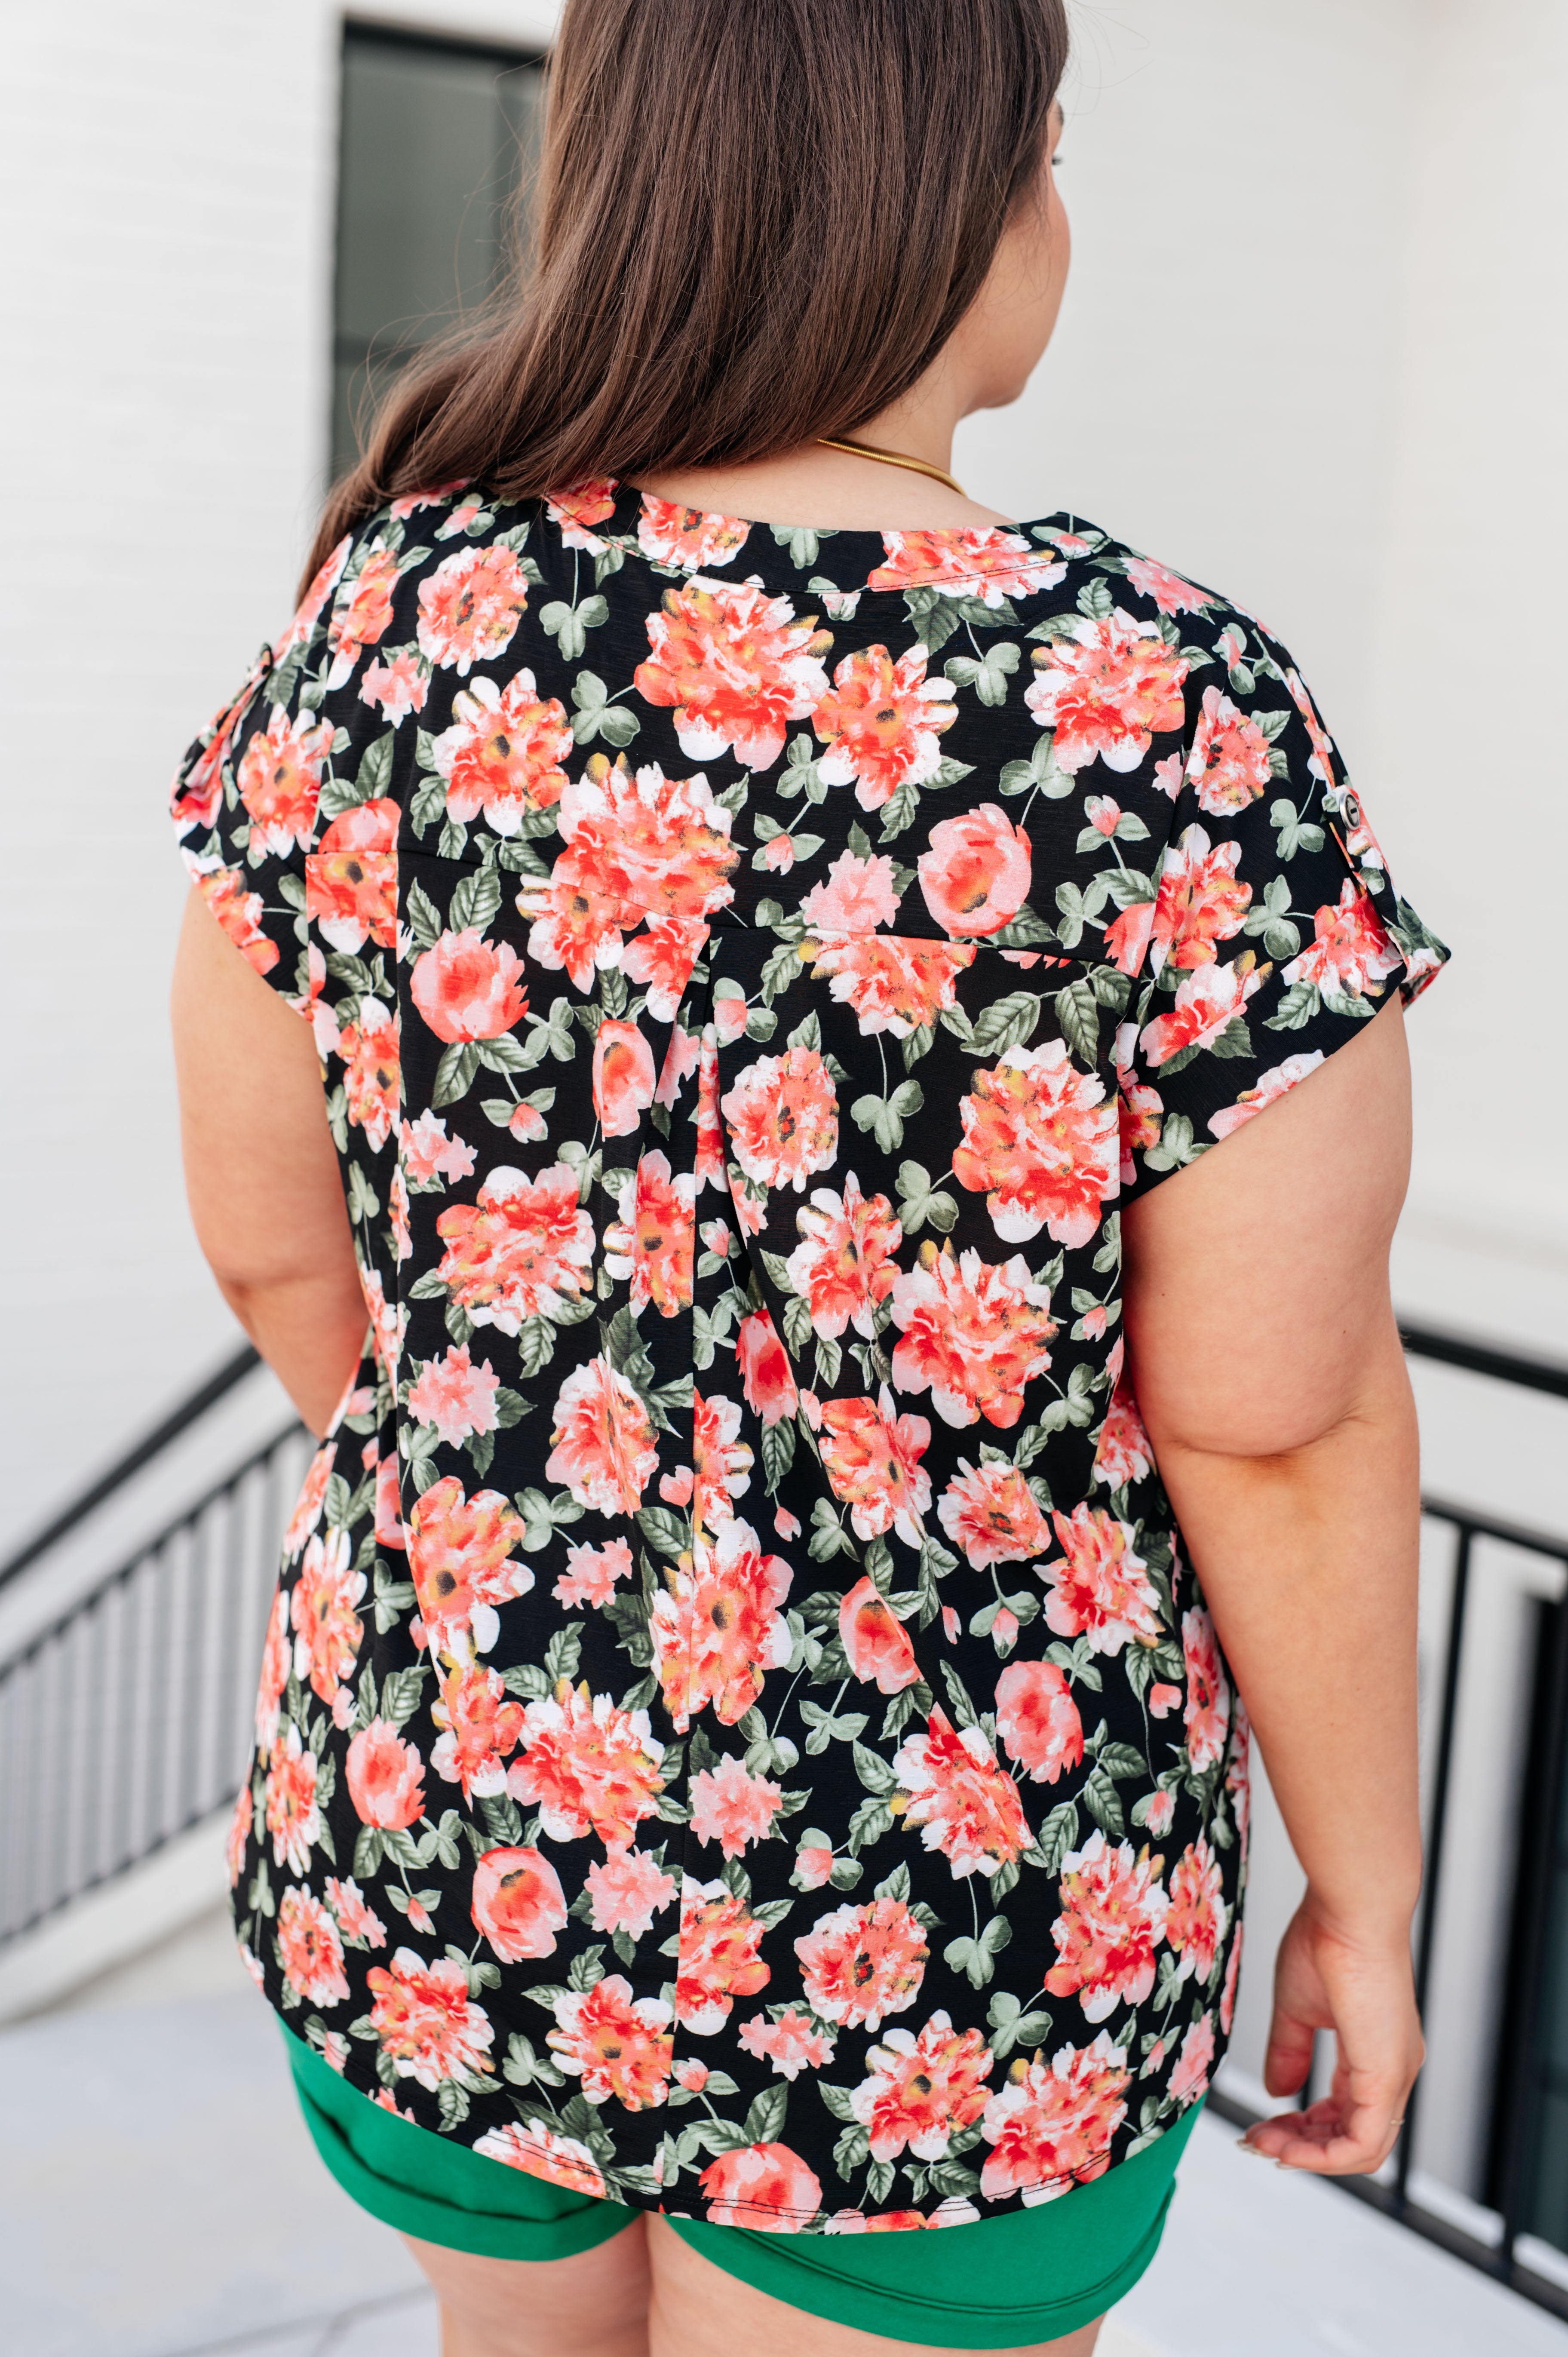 Dear Scarlett Lizzy Cap Sleeve Top in Black and Coral Floral Ave Shops